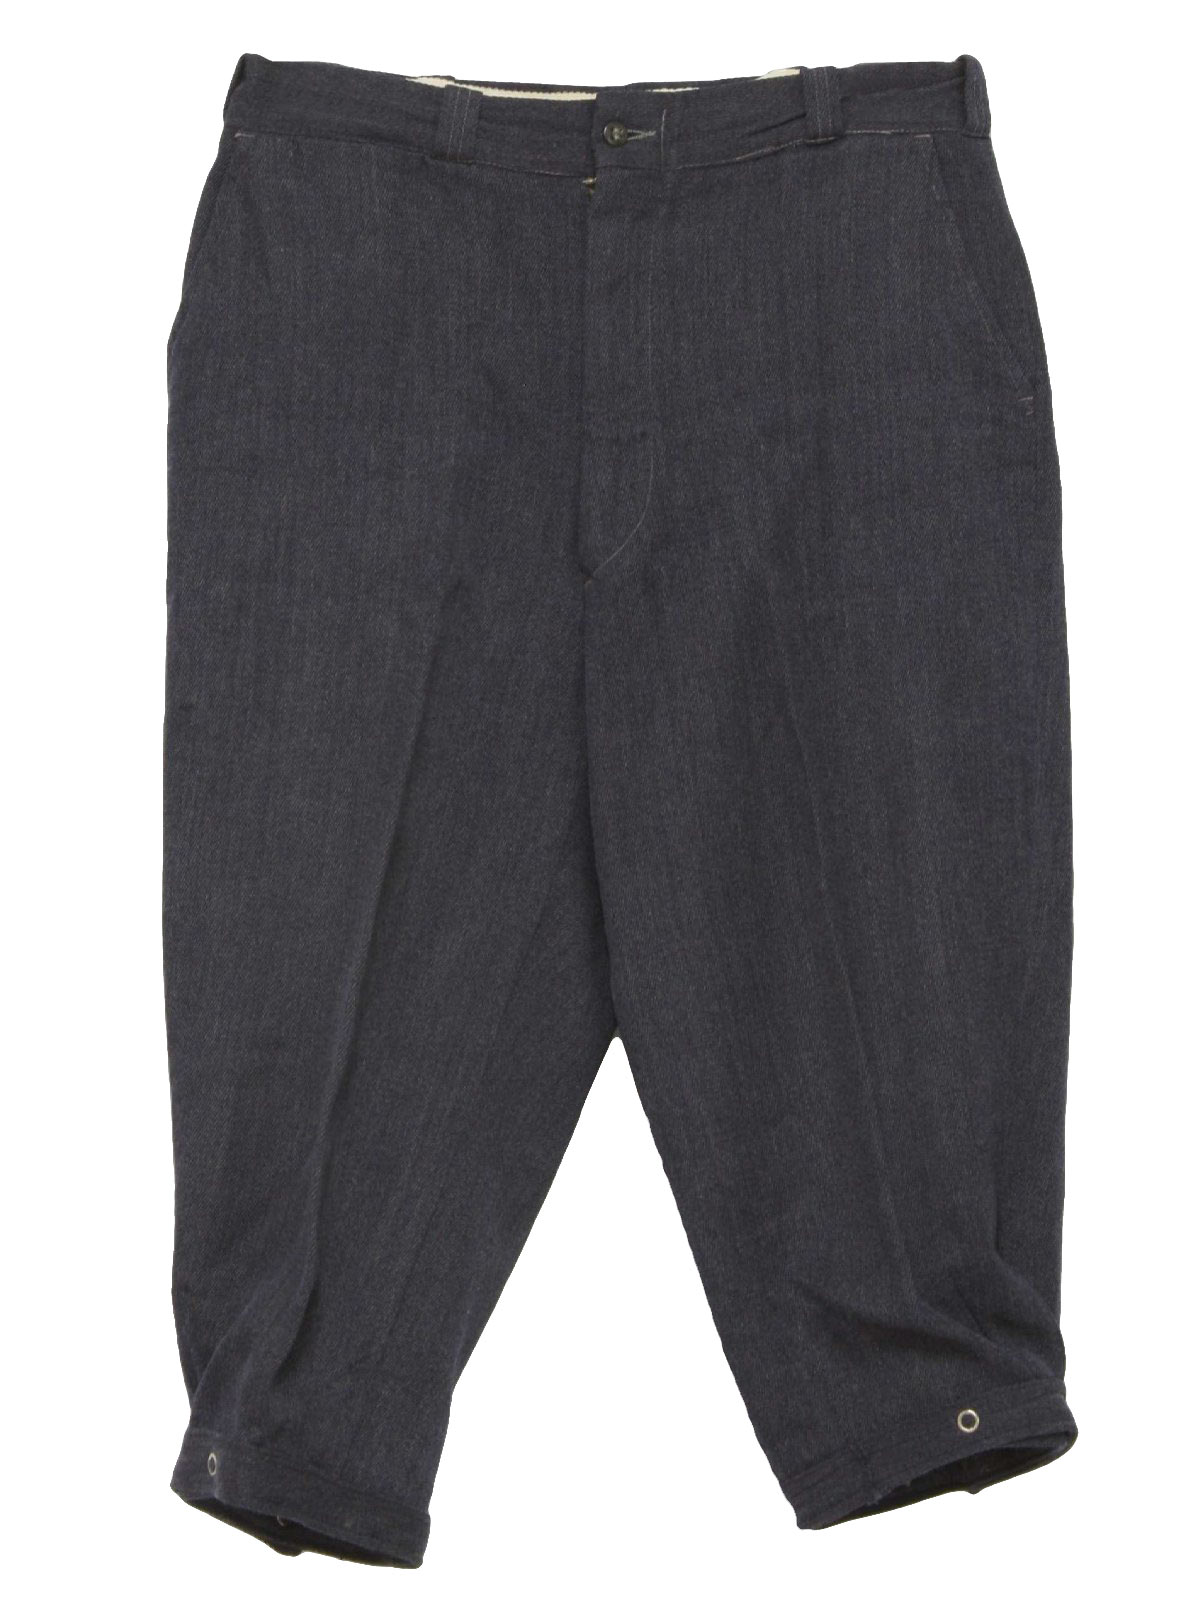 Retro 50s Pants: 50s -No Label- Mens charcoal heather wool whipcord ...